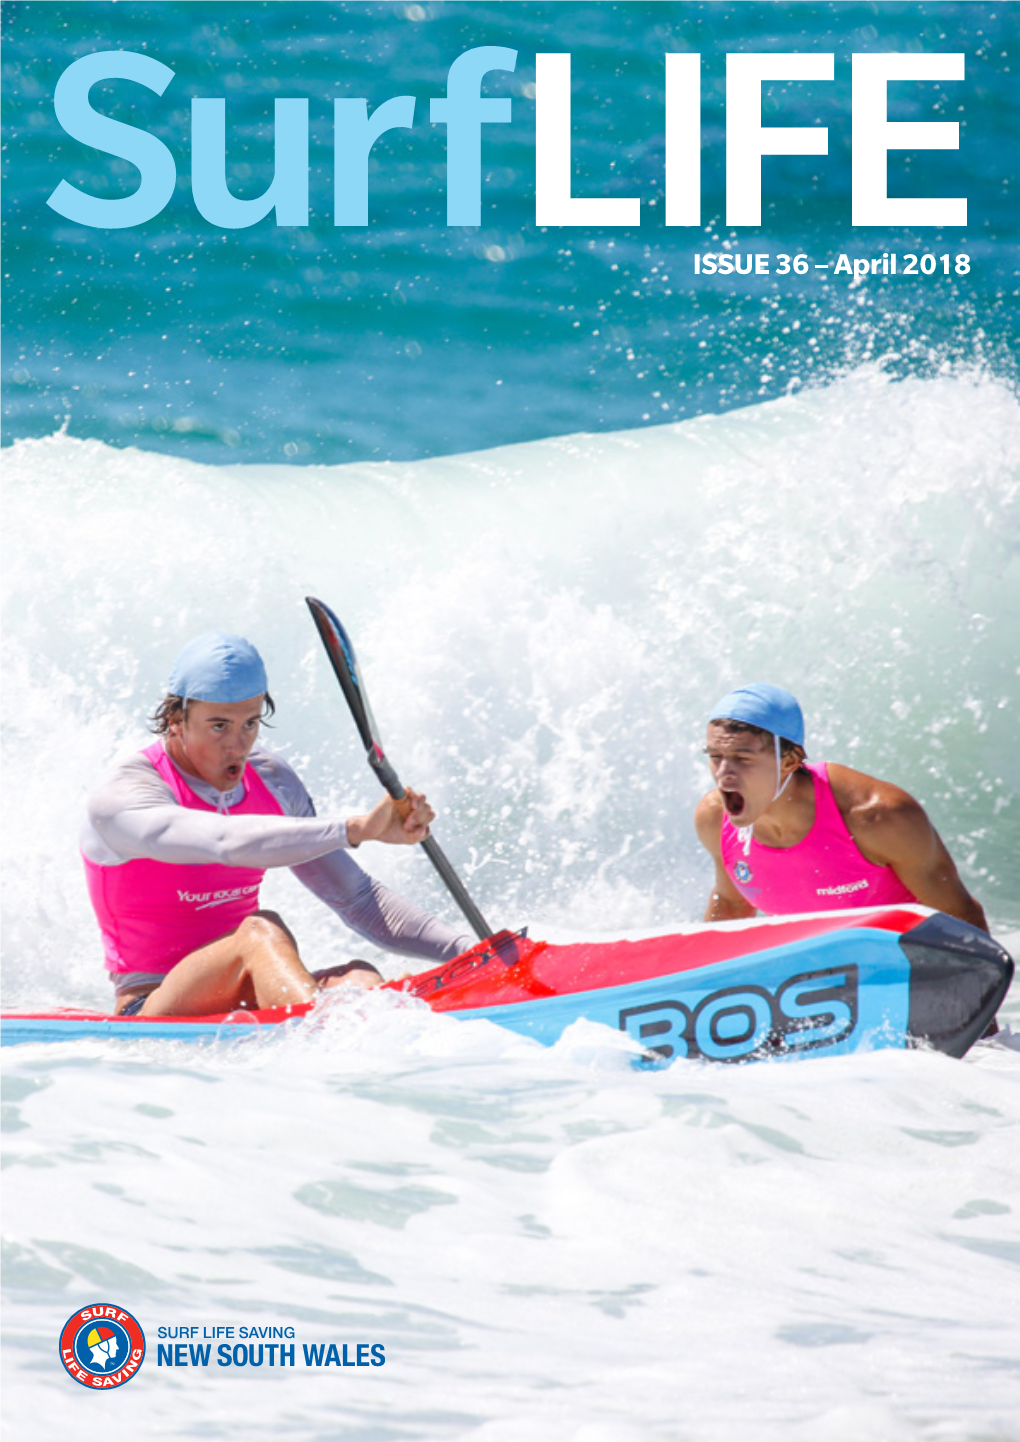 Surflife ISSUE 36 – April 2018 Your Local Club Is a Proud Supporter of Surf Life Saving NSW